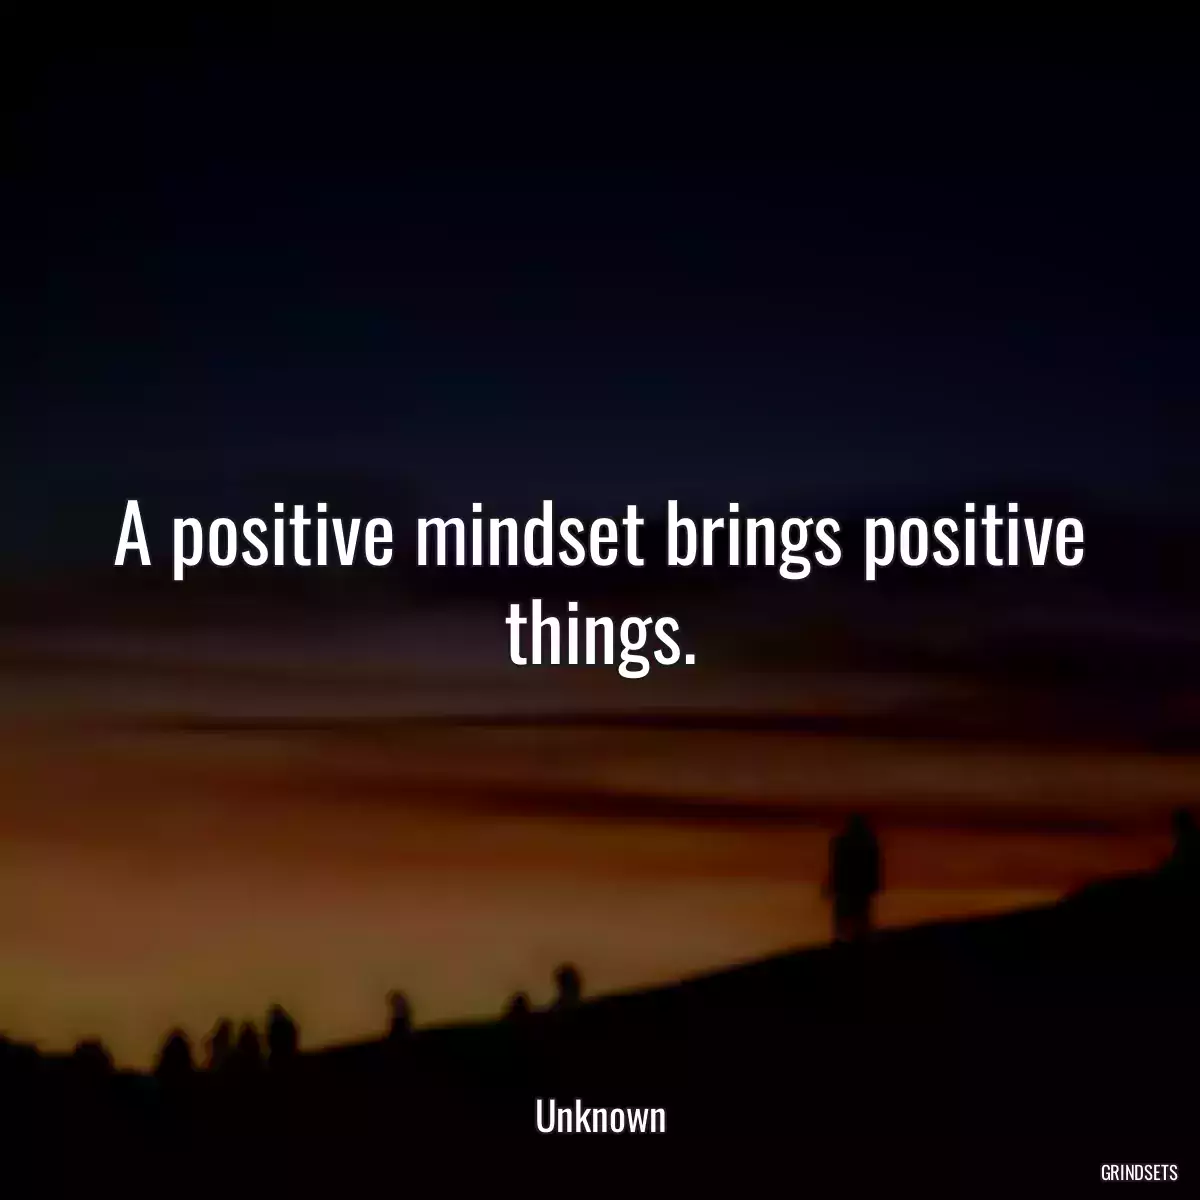 A positive mindset brings positive things.